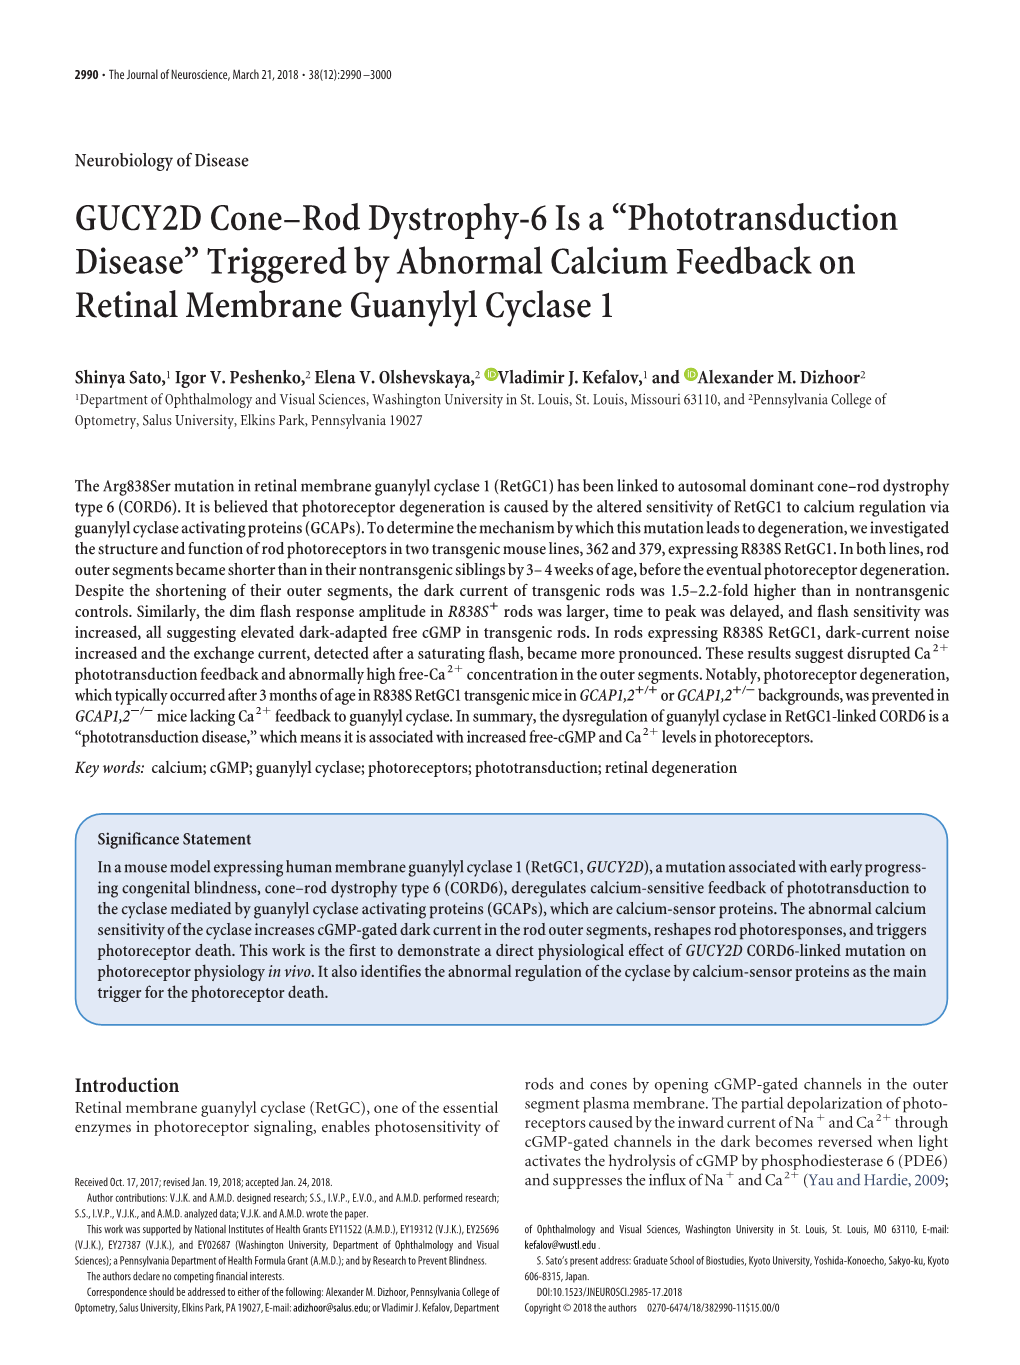 GUCY2D Cone–Rod Dystrophy-6 Is a “Phototransduction Disease” Triggered by Abnormal Calcium Feedback on Retinal Membrane Guanylyl Cyclase 1